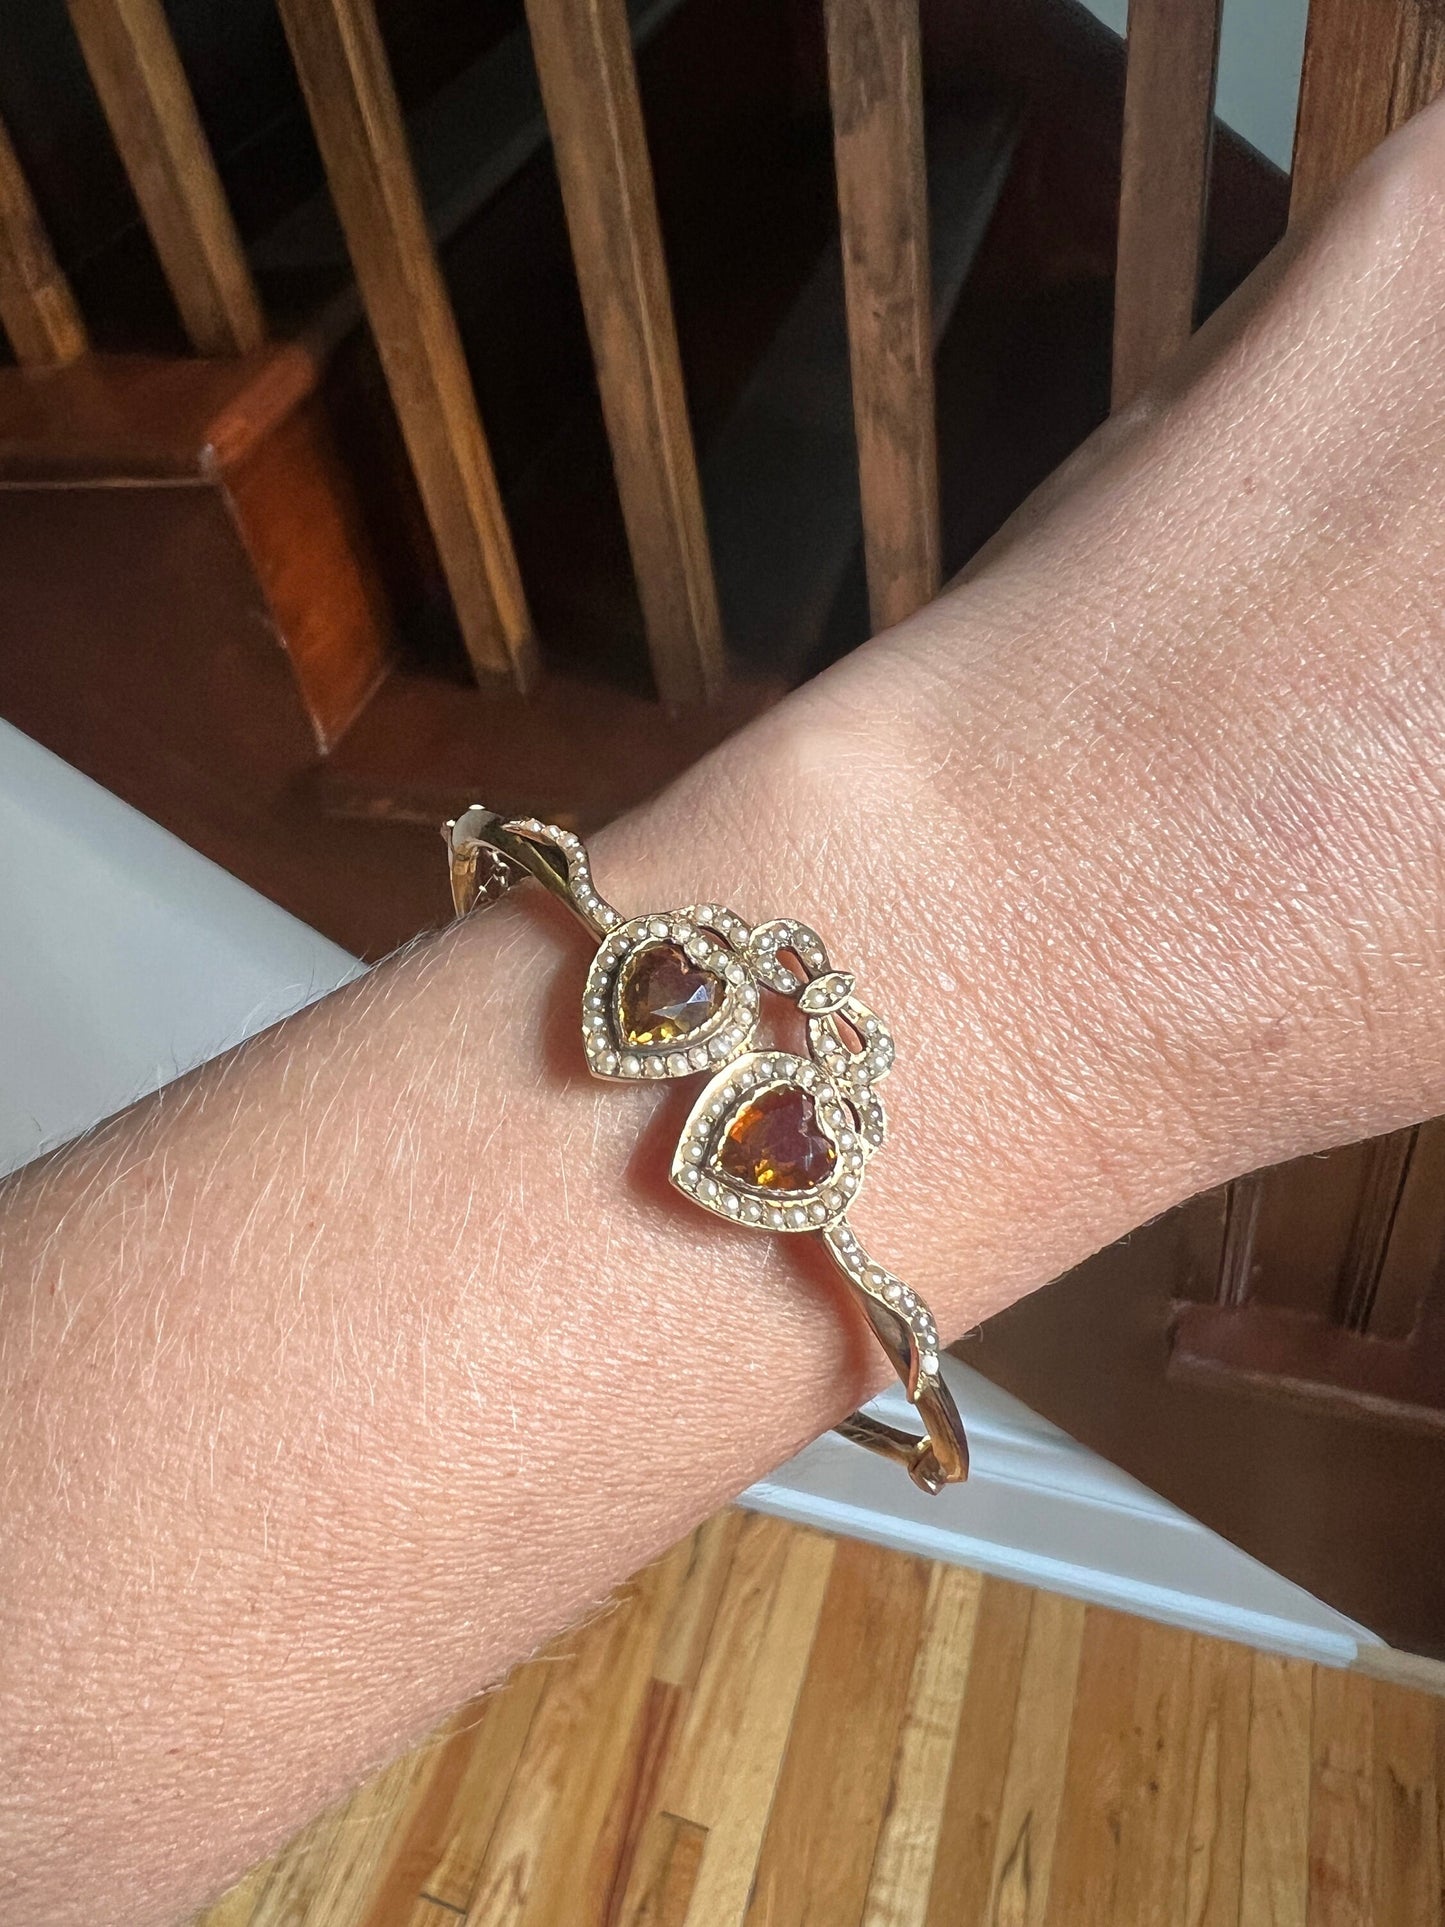 FIGURAL Double HEART Bowed CITRINE Seed Pearl Antique Hinged Bangle Bracelet 15k Gold Ribbon Stacker Wriststack Romantic Victorian Not 14k